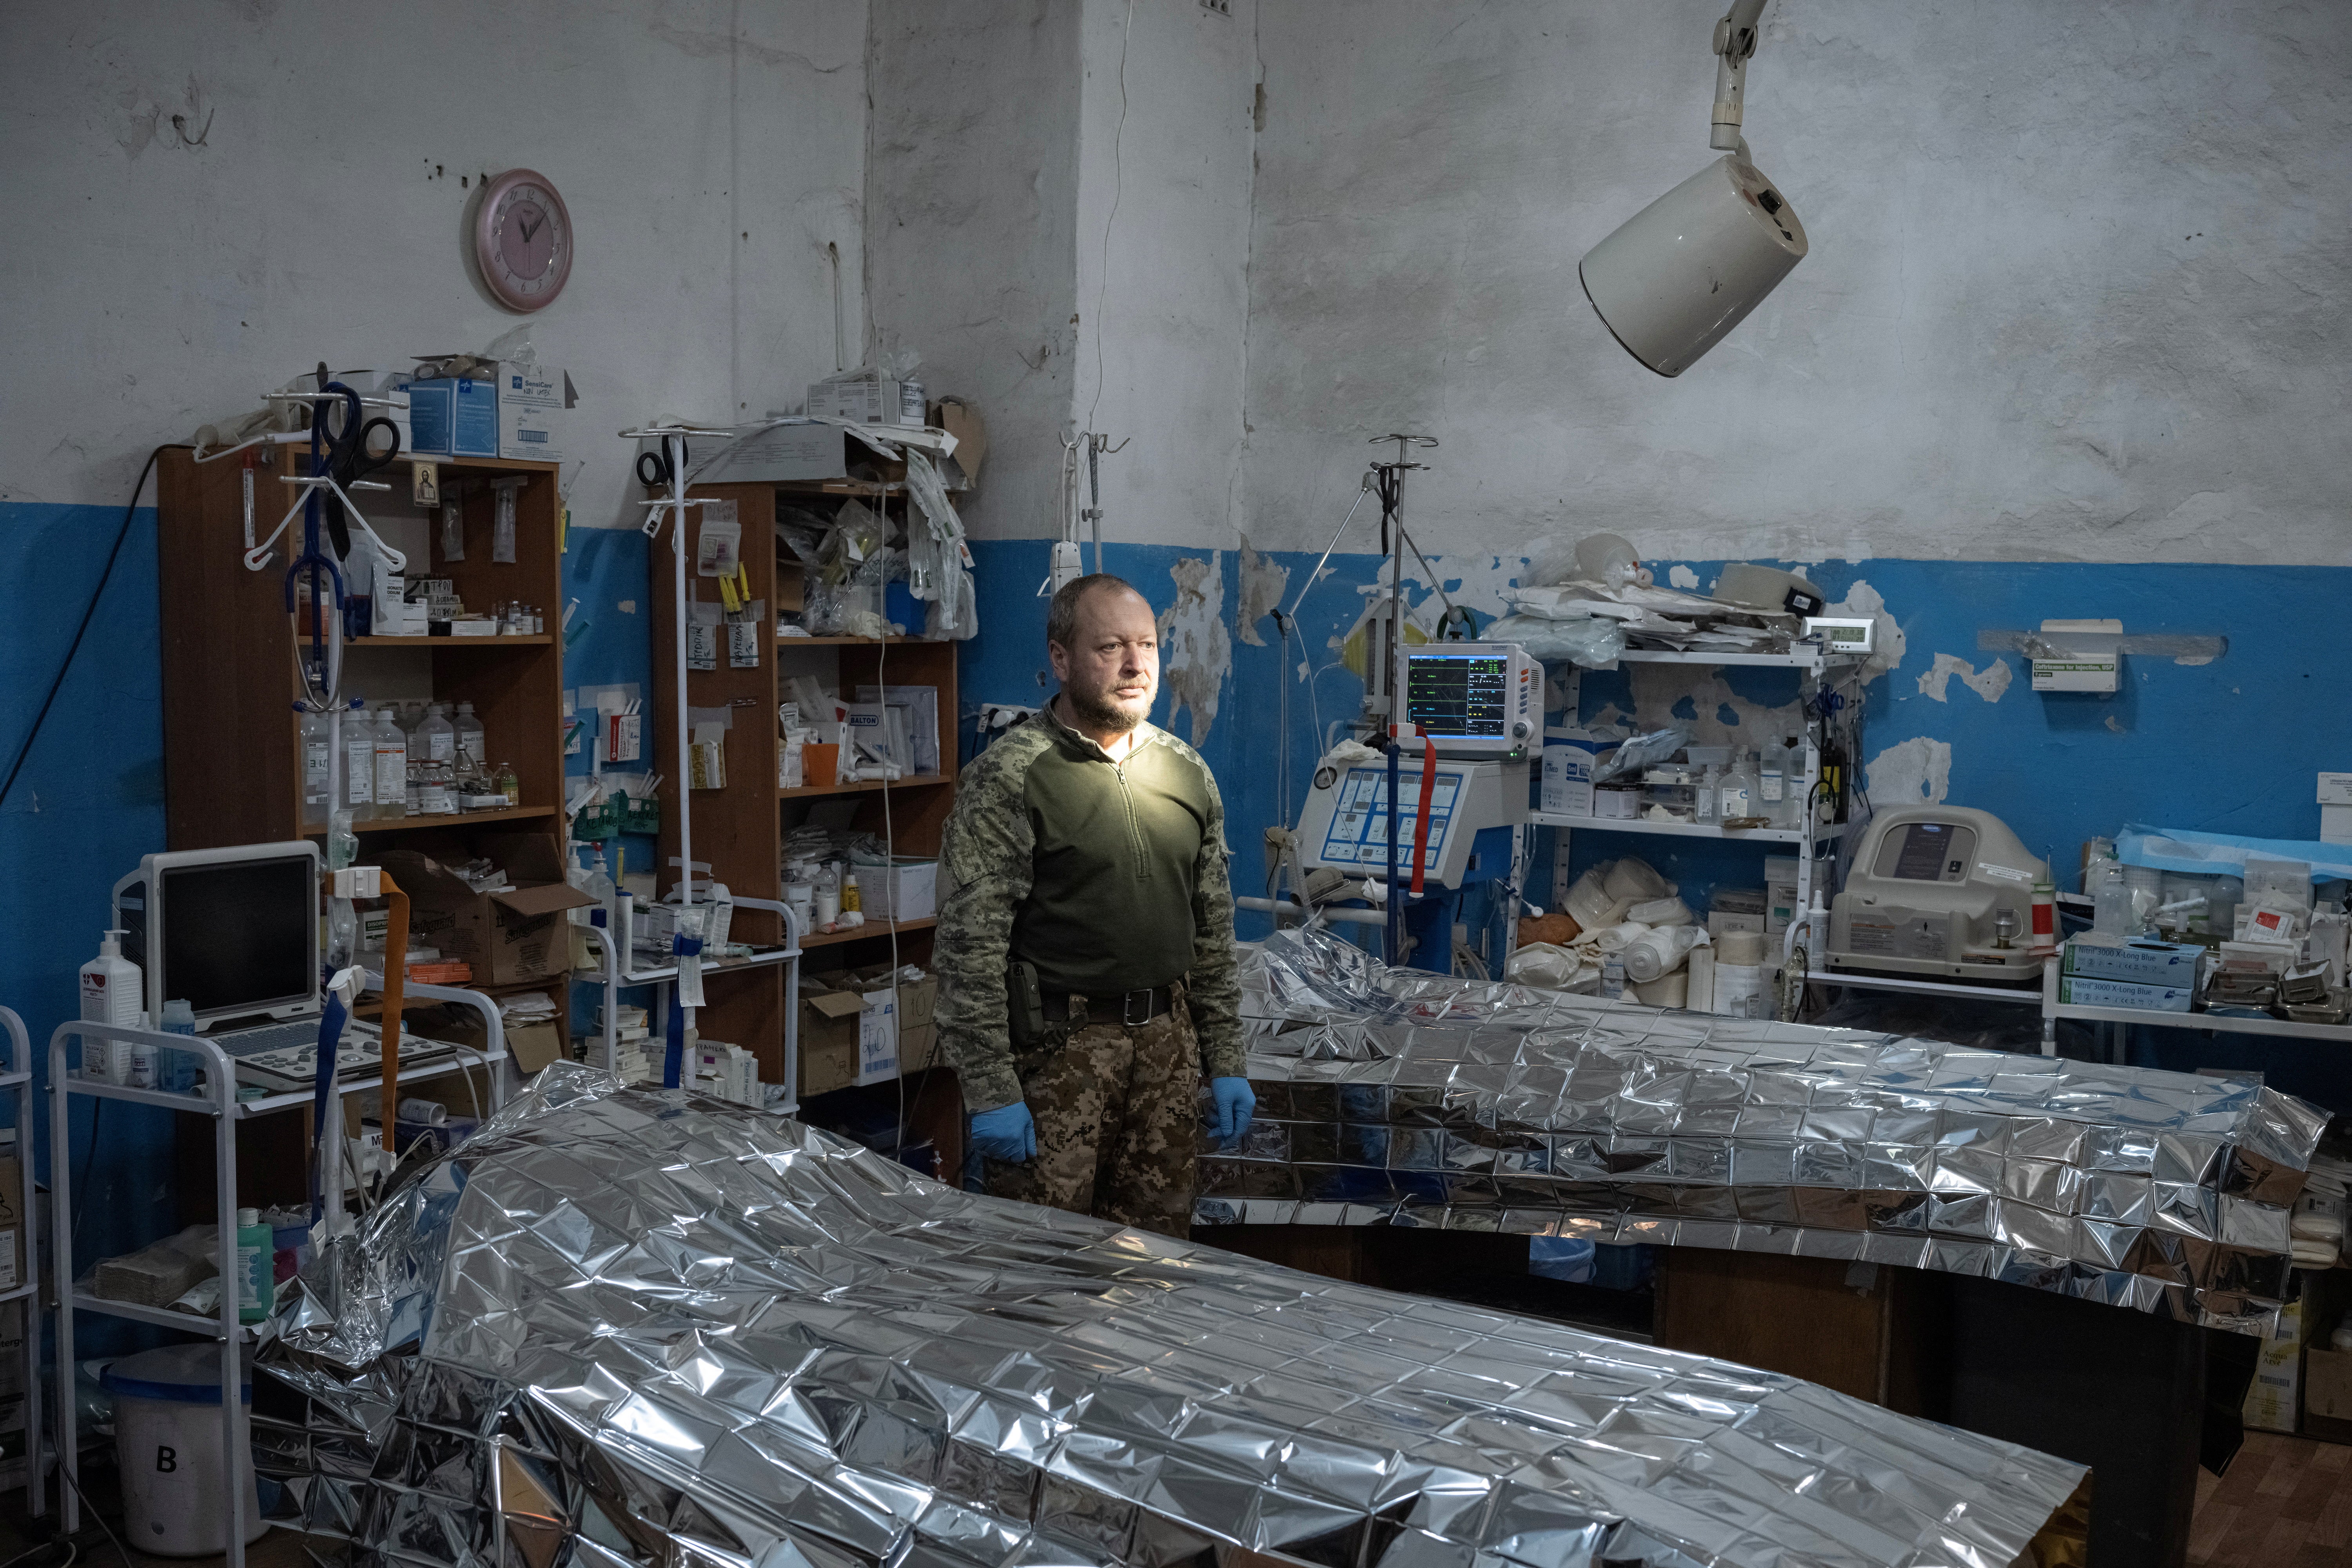 Viktor is a surgeon in a frontline medical stabilisation point where medics treat war wounds